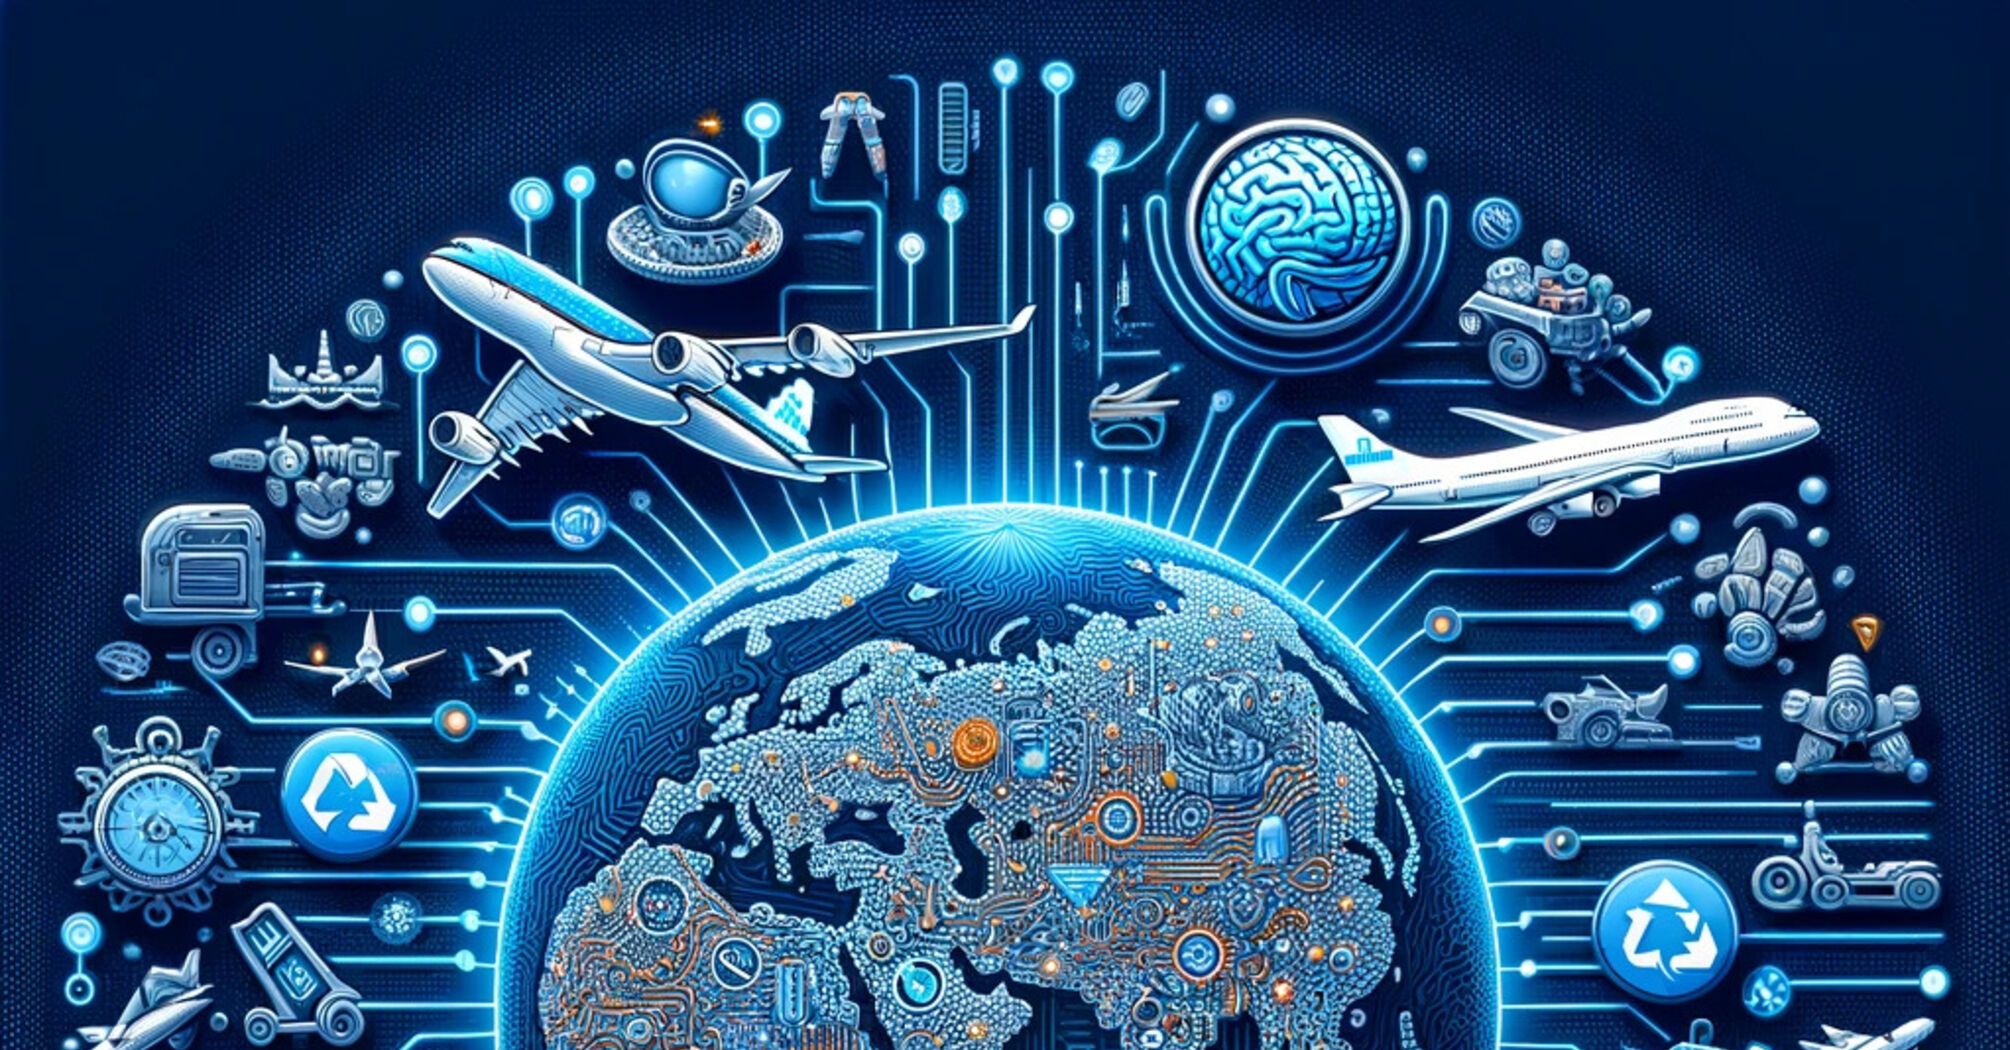 Abstract illustration representing KLM's AI-driven sustainability efforts, with a digital globe